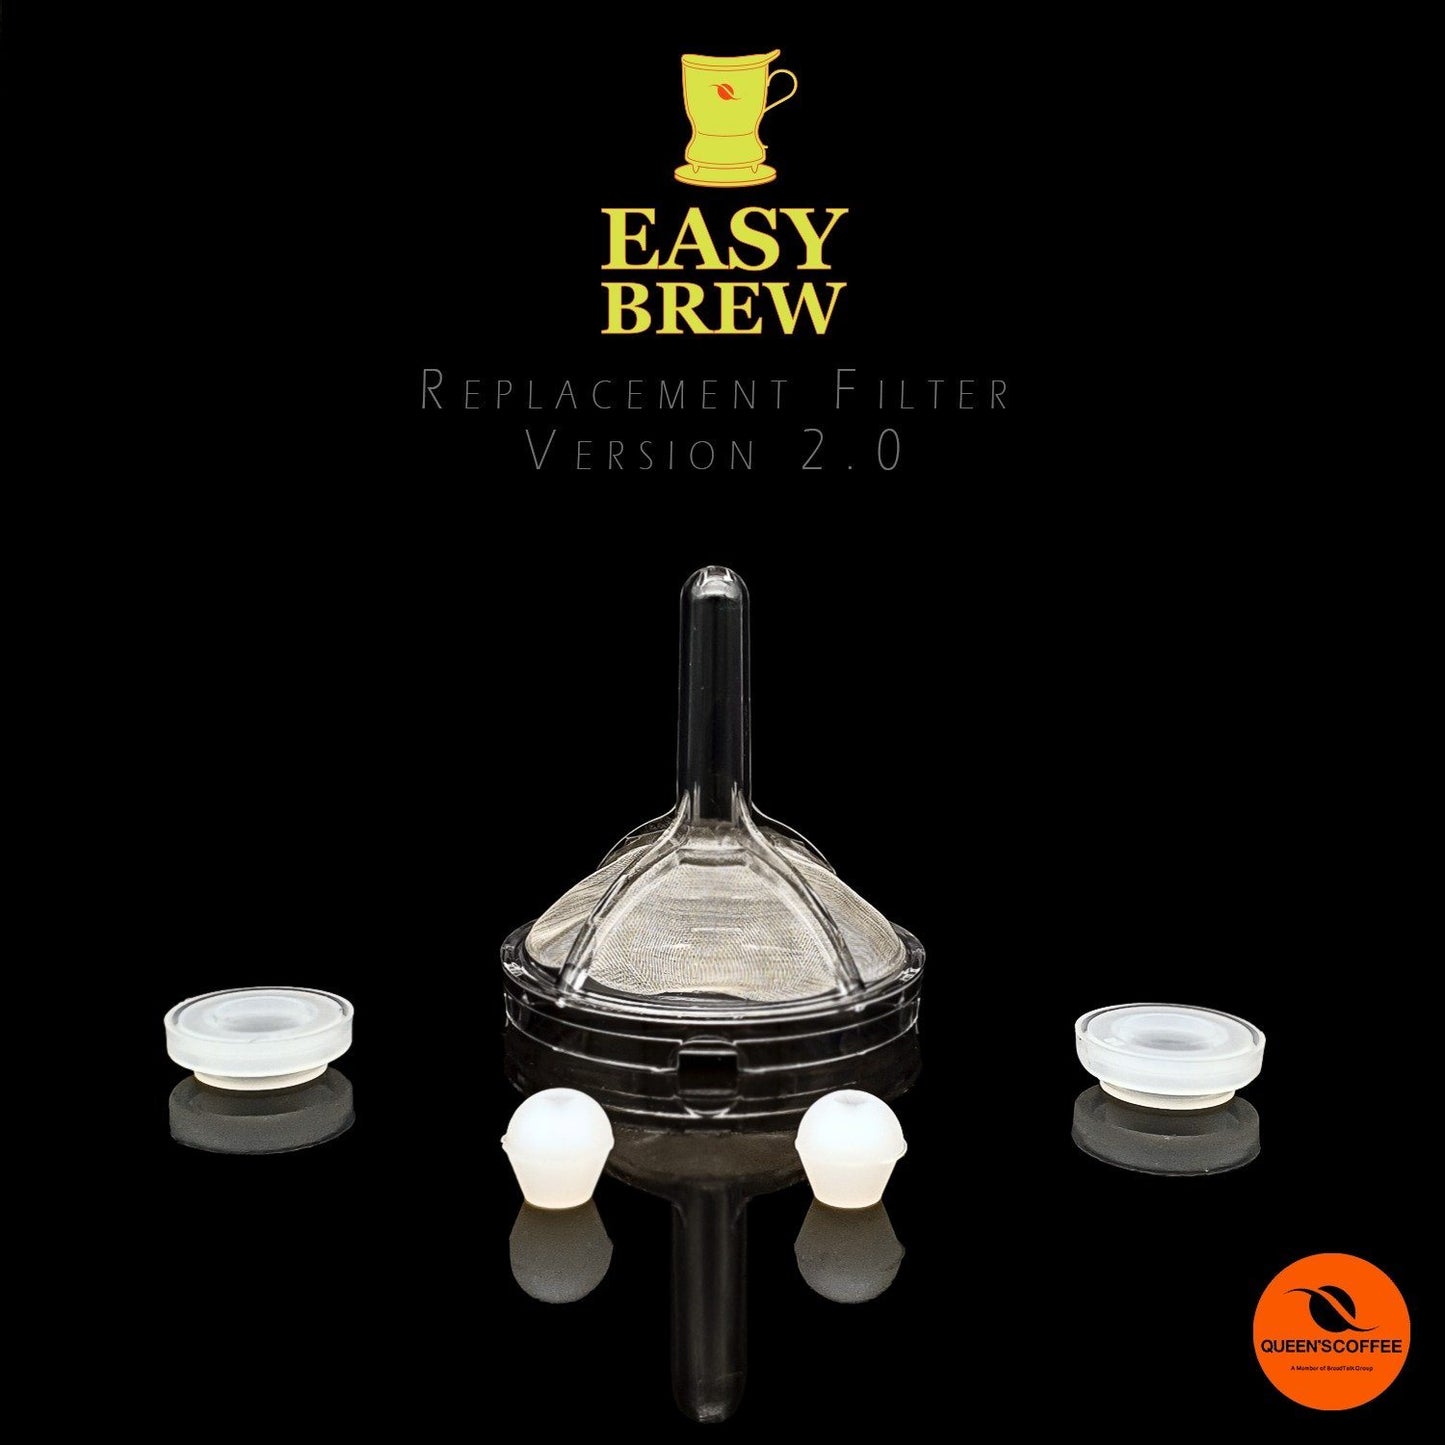 [Queen's Coffee] Coffee Brewer Orange (BPA Free - Tested by SGS) From Taiwan - Bloom Concept